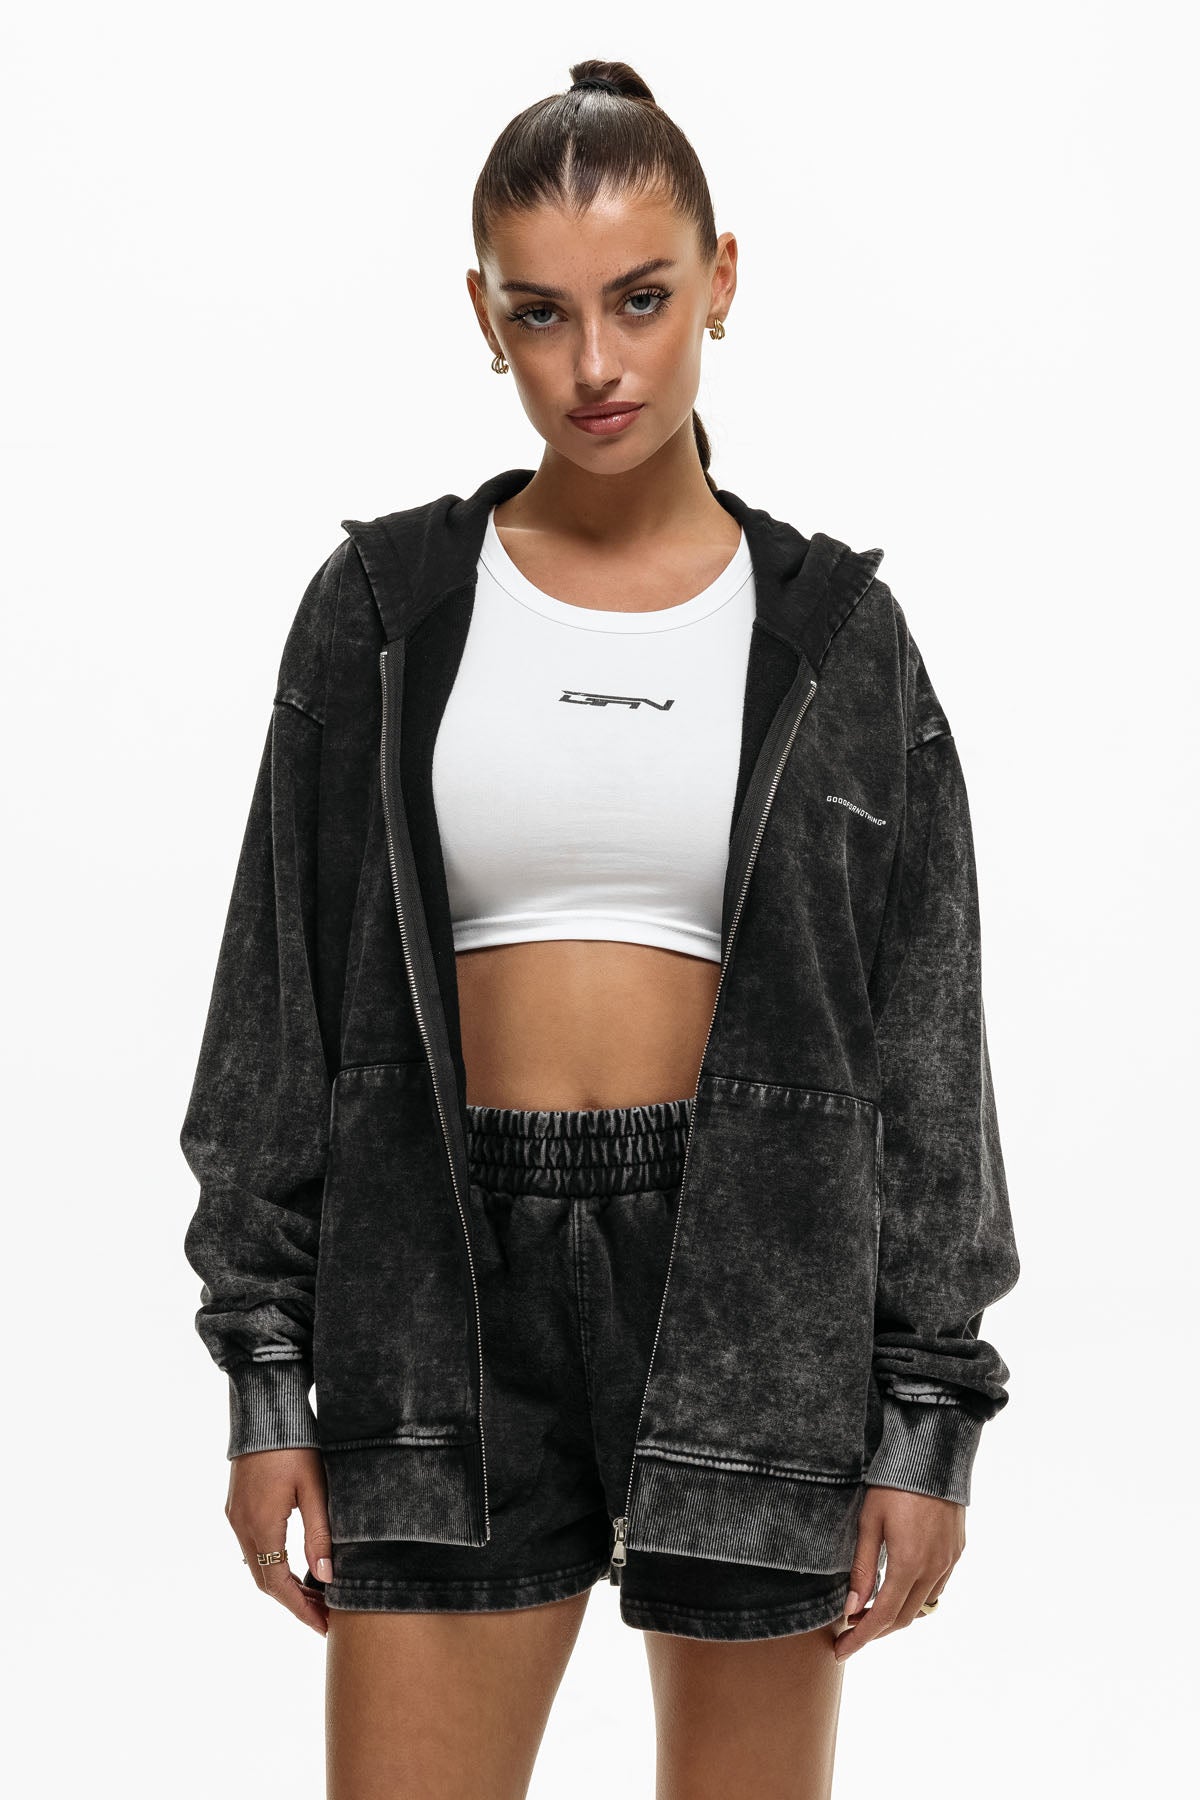 Charcoal Oversized Washed Zip Up Hoodie